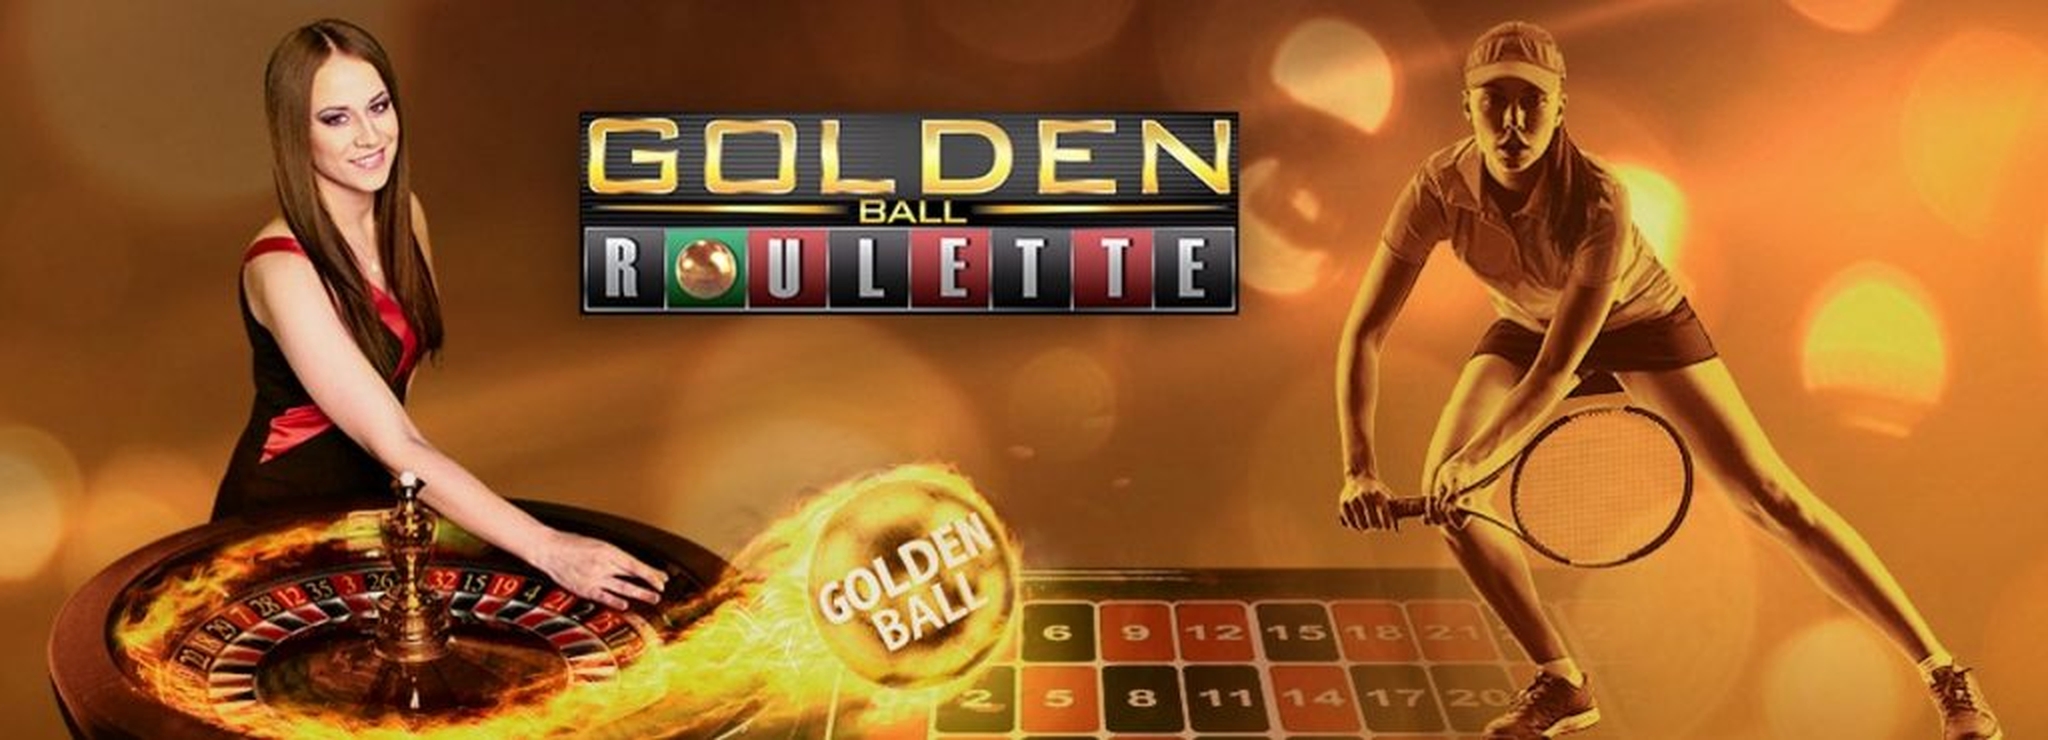 The Roulette Golden Ball Live casino Online Slot Demo Game by Extreme Live Gaming